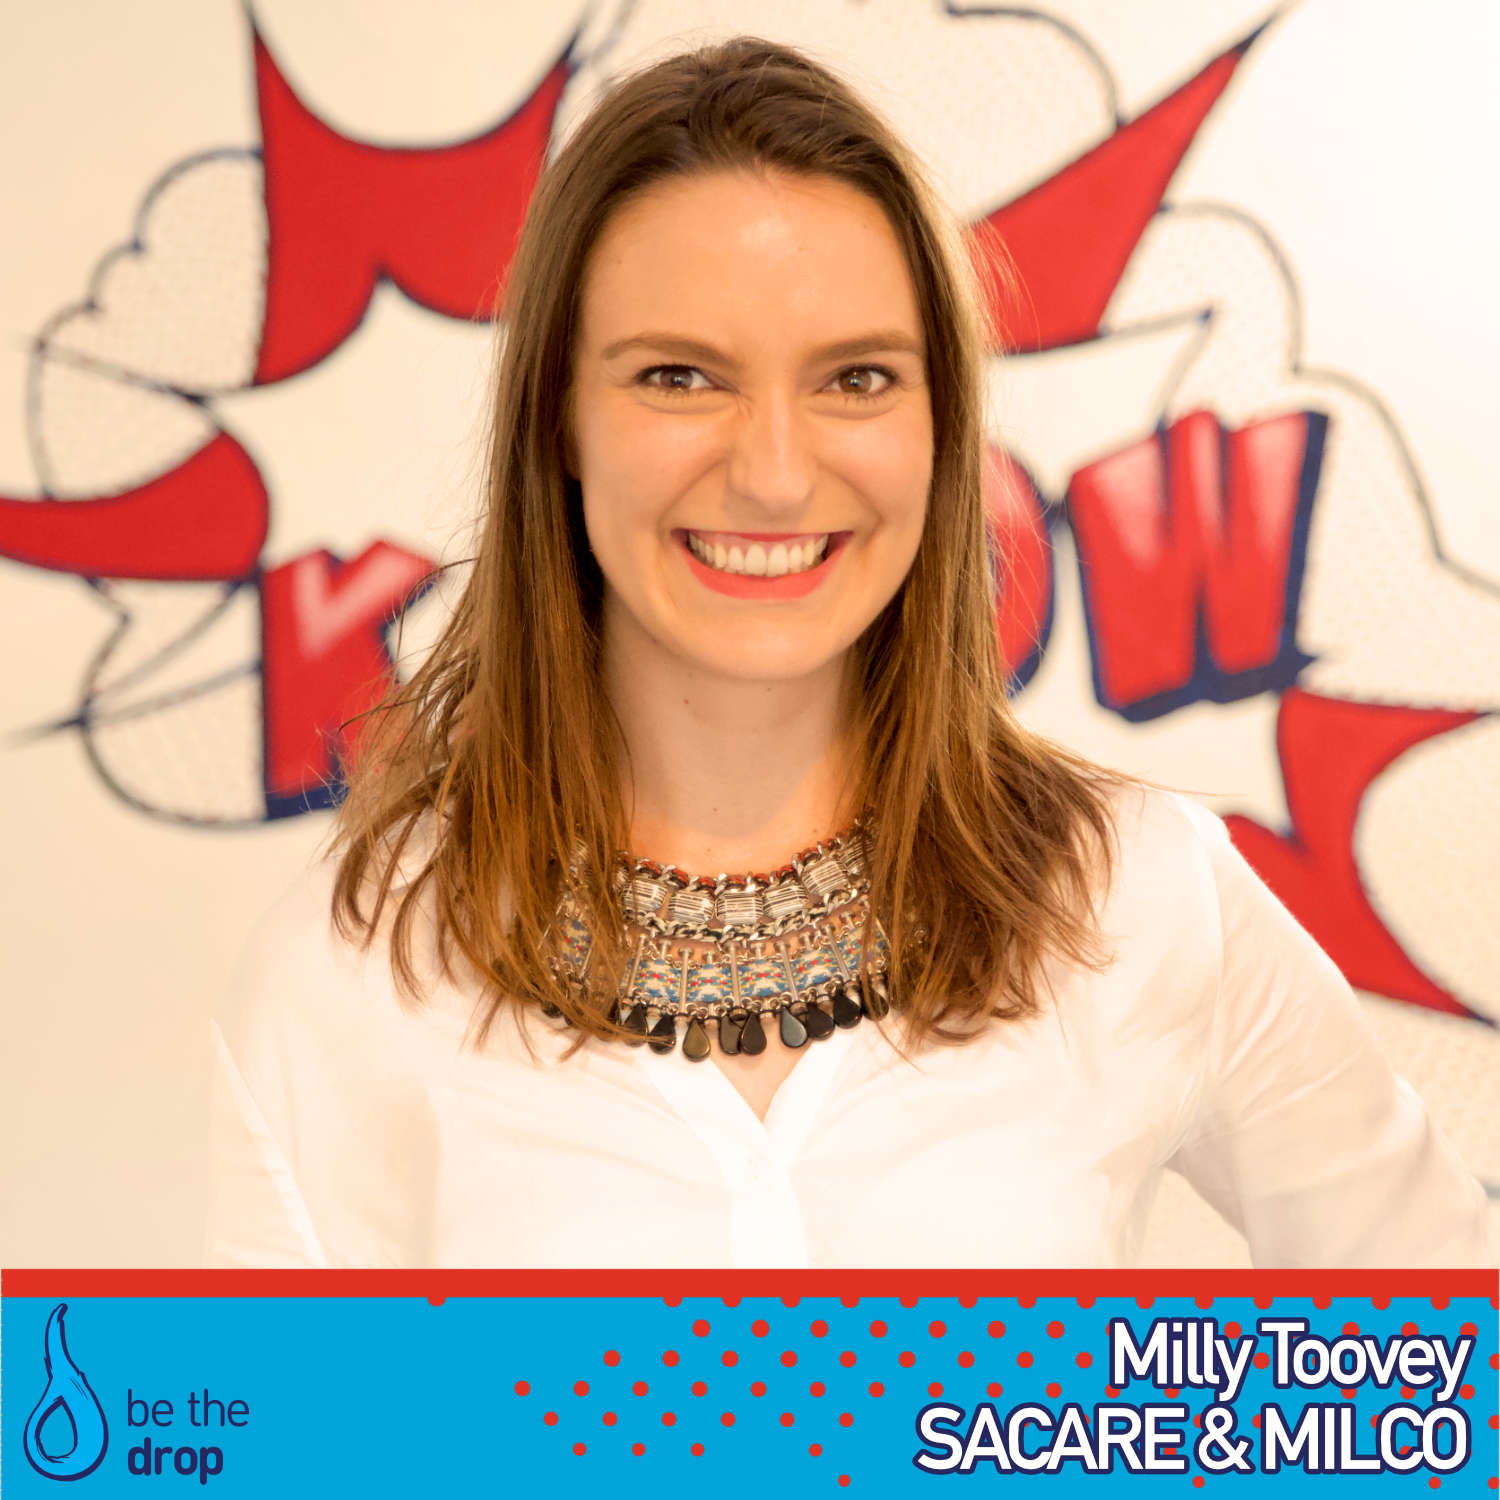 Milly Toovey discusses her journey to finding self worth